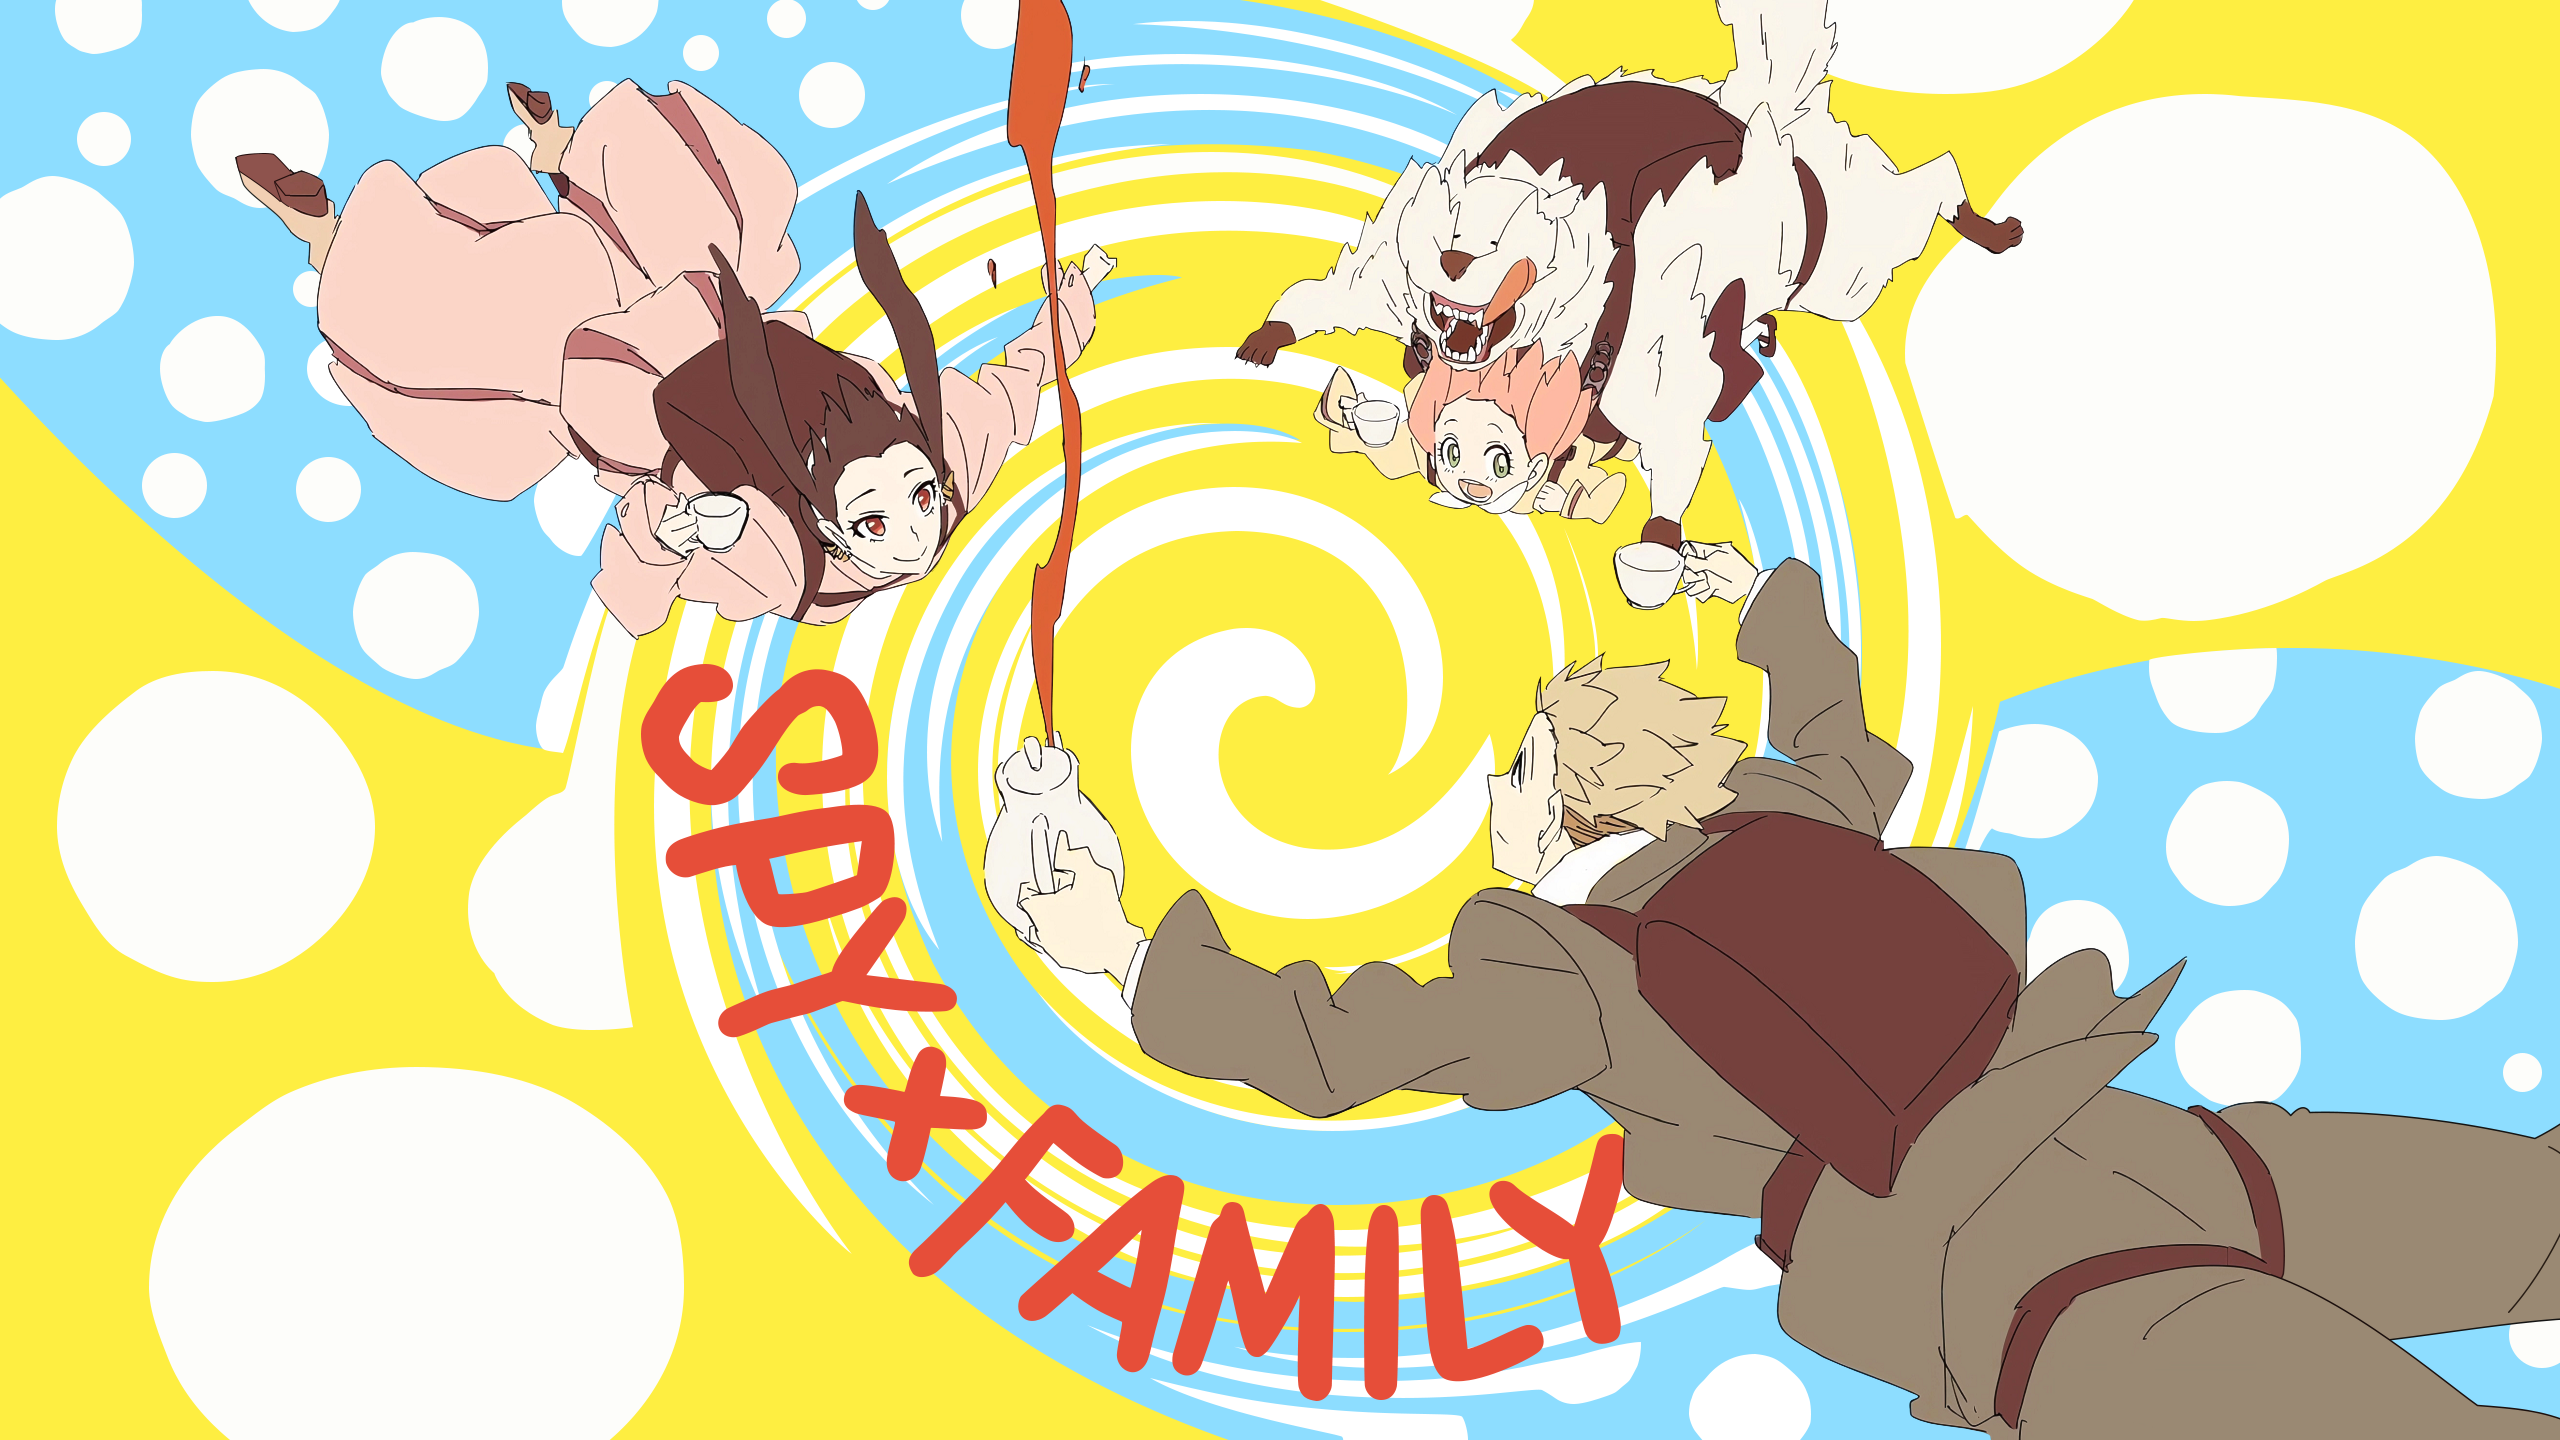 Anime 2560x1440 anime girls anime boys Spy x Family Loid Forger Yor Forger Anya Forger Bond Forger skydiving swirls falling cup smiling animals dog